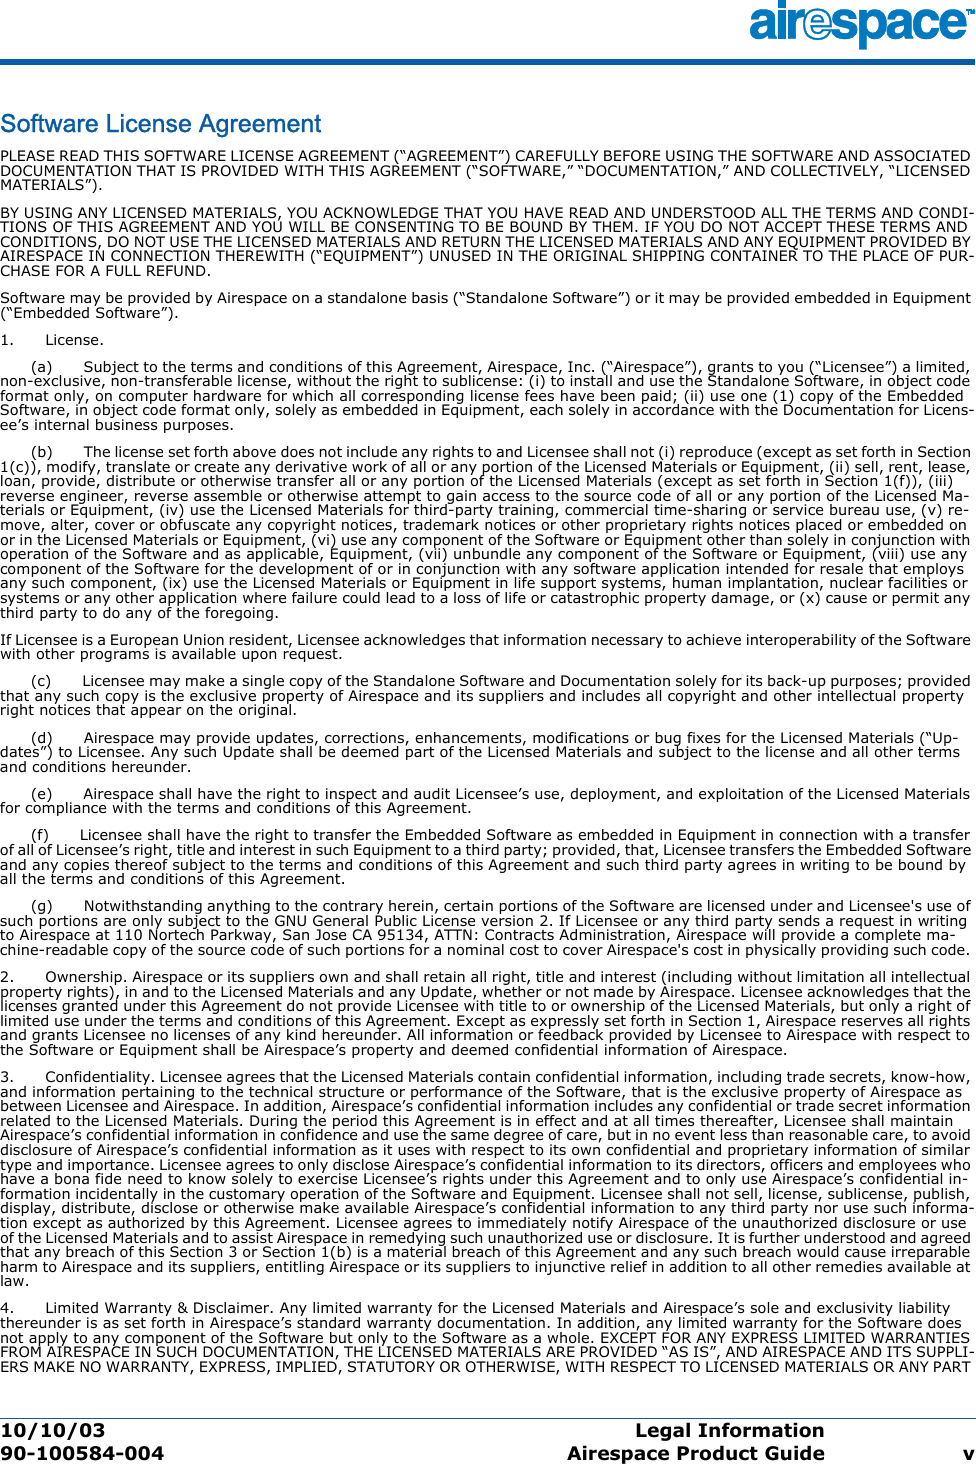 10/10/03 Legal Information  90-100584-004 Airespace Product Guide vSoftware License AgreementSoftware License AgreementPLEASE READ THIS SOFTWARE LICENSE AGREEMENT (“AGREEMENT”) CAREFULLY BEFORE USING THE SOFTWARE AND ASSOCIATED DOCUMENTATION THAT IS PROVIDED WITH THIS AGREEMENT (“SOFTWARE,” “DOCUMENTATION,” AND COLLECTIVELY, “LICENSED MATERIALS”). BY USING ANY LICENSED MATERIALS, YOU ACKNOWLEDGE THAT YOU HAVE READ AND UNDERSTOOD ALL THE TERMS AND CONDI-TIONS OF THIS AGREEMENT AND YOU WILL BE CONSENTING TO BE BOUND BY THEM. IF YOU DO NOT ACCEPT THESE TERMS AND CONDITIONS, DO NOT USE THE LICENSED MATERIALS AND RETURN THE LICENSED MATERIALS AND ANY EQUIPMENT PROVIDED BY AIRESPACE IN CONNECTION THEREWITH (“EQUIPMENT”) UNUSED IN THE ORIGINAL SHIPPING CONTAINER TO THE PLACE OF PUR-CHASE FOR A FULL REFUND. Software may be provided by Airespace on a standalone basis (“Standalone Software”) or it may be provided embedded in Equipment (“Embedded Software”).1.      License.      (a)      Subject to the terms and conditions of this Agreement, Airespace, Inc. (“Airespace”), grants to you (“Licensee”) a limited, non-exclusive, non-transferable license, without the right to sublicense: (i) to install and use the Standalone Software, in object code format only, on computer hardware for which all corresponding license fees have been paid; (ii) use one (1) copy of the Embedded Software, in object code format only, solely as embedded in Equipment, each solely in accordance with the Documentation for Licens-ee’s internal business purposes.      (b)      The license set forth above does not include any rights to and Licensee shall not (i) reproduce (except as set forth in Section 1(c)), modify, translate or create any derivative work of all or any portion of the Licensed Materials or Equipment, (ii) sell, rent, lease, loan, provide, distribute or otherwise transfer all or any portion of the Licensed Materials (except as set forth in Section 1(f)), (iii) reverse engineer, reverse assemble or otherwise attempt to gain access to the source code of all or any portion of the Licensed Ma-terials or Equipment, (iv) use the Licensed Materials for third-party training, commercial time-sharing or service bureau use, (v) re-move, alter, cover or obfuscate any copyright notices, trademark notices or other proprietary rights notices placed or embedded on or in the Licensed Materials or Equipment, (vi) use any component of the Software or Equipment other than solely in conjunction with operation of the Software and as applicable, Equipment, (vii) unbundle any component of the Software or Equipment, (viii) use any component of the Software for the development of or in conjunction with any software application intended for resale that employs any such component, (ix) use the Licensed Materials or Equipment in life support systems, human implantation, nuclear facilities or systems or any other application where failure could lead to a loss of life or catastrophic property damage, or (x) cause or permit any third party to do any of the foregoing. If Licensee is a European Union resident, Licensee acknowledges that information necessary to achieve interoperability of the Software with other programs is available upon request.      (c)      Licensee may make a single copy of the Standalone Software and Documentation solely for its back-up purposes; provided that any such copy is the exclusive property of Airespace and its suppliers and includes all copyright and other intellectual property right notices that appear on the original.      (d)      Airespace may provide updates, corrections, enhancements, modifications or bug fixes for the Licensed Materials (“Up-dates”) to Licensee. Any such Update shall be deemed part of the Licensed Materials and subject to the license and all other terms and conditions hereunder.      (e)      Airespace shall have the right to inspect and audit Licensee’s use, deployment, and exploitation of the Licensed Materials for compliance with the terms and conditions of this Agreement.      (f)      Licensee shall have the right to transfer the Embedded Software as embedded in Equipment in connection with a transfer of all of Licensee’s right, title and interest in such Equipment to a third party; provided, that, Licensee transfers the Embedded Software and any copies thereof subject to the terms and conditions of this Agreement and such third party agrees in writing to be bound by all the terms and conditions of this Agreement.       (g)      Notwithstanding anything to the contrary herein, certain portions of the Software are licensed under and Licensee&apos;s use of such portions are only subject to the GNU General Public License version 2. If Licensee or any third party sends a request in writing to Airespace at 110 Nortech Parkway, San Jose CA 95134, ATTN: Contracts Administration, Airespace will provide a complete ma-chine-readable copy of the source code of such portions for a nominal cost to cover Airespace&apos;s cost in physically providing such code. 2.      Ownership. Airespace or its suppliers own and shall retain all right, title and interest (including without limitation all intellectual property rights), in and to the Licensed Materials and any Update, whether or not made by Airespace. Licensee acknowledges that the licenses granted under this Agreement do not provide Licensee with title to or ownership of the Licensed Materials, but only a right of limited use under the terms and conditions of this Agreement. Except as expressly set forth in Section 1, Airespace reserves all rights and grants Licensee no licenses of any kind hereunder. All information or feedback provided by Licensee to Airespace with respect to the Software or Equipment shall be Airespace’s property and deemed confidential information of Airespace. 3.      Confidentiality. Licensee agrees that the Licensed Materials contain confidential information, including trade secrets, know-how, and information pertaining to the technical structure or performance of the Software, that is the exclusive property of Airespace as between Licensee and Airespace. In addition, Airespace’s confidential information includes any confidential or trade secret information related to the Licensed Materials. During the period this Agreement is in effect and at all times thereafter, Licensee shall maintain Airespace’s confidential information in confidence and use the same degree of care, but in no event less than reasonable care, to avoid disclosure of Airespace’s confidential information as it uses with respect to its own confidential and proprietary information of similar type and importance. Licensee agrees to only disclose Airespace’s confidential information to its directors, officers and employees who have a bona fide need to know solely to exercise Licensee’s rights under this Agreement and to only use Airespace’s confidential in-formation incidentally in the customary operation of the Software and Equipment. Licensee shall not sell, license, sublicense, publish, display, distribute, disclose or otherwise make available Airespace’s confidential information to any third party nor use such informa-tion except as authorized by this Agreement. Licensee agrees to immediately notify Airespace of the unauthorized disclosure or use of the Licensed Materials and to assist Airespace in remedying such unauthorized use or disclosure. It is further understood and agreed that any breach of this Section 3 or Section 1(b) is a material breach of this Agreement and any such breach would cause irreparable harm to Airespace and its suppliers, entitling Airespace or its suppliers to injunctive relief in addition to all other remedies available at law. 4.      Limited Warranty &amp; Disclaimer. Any limited warranty for the Licensed Materials and Airespace’s sole and exclusivity liability thereunder is as set forth in Airespace’s standard warranty documentation. In addition, any limited warranty for the Software does not apply to any component of the Software but only to the Software as a whole. EXCEPT FOR ANY EXPRESS LIMITED WARRANTIES FROM AIRESPACE IN SUCH DOCUMENTATION, THE LICENSED MATERIALS ARE PROVIDED “AS IS”, AND AIRESPACE AND ITS SUPPLI-ERS MAKE NO WARRANTY, EXPRESS, IMPLIED, STATUTORY OR OTHERWISE, WITH RESPECT TO LICENSED MATERIALS OR ANY PART 